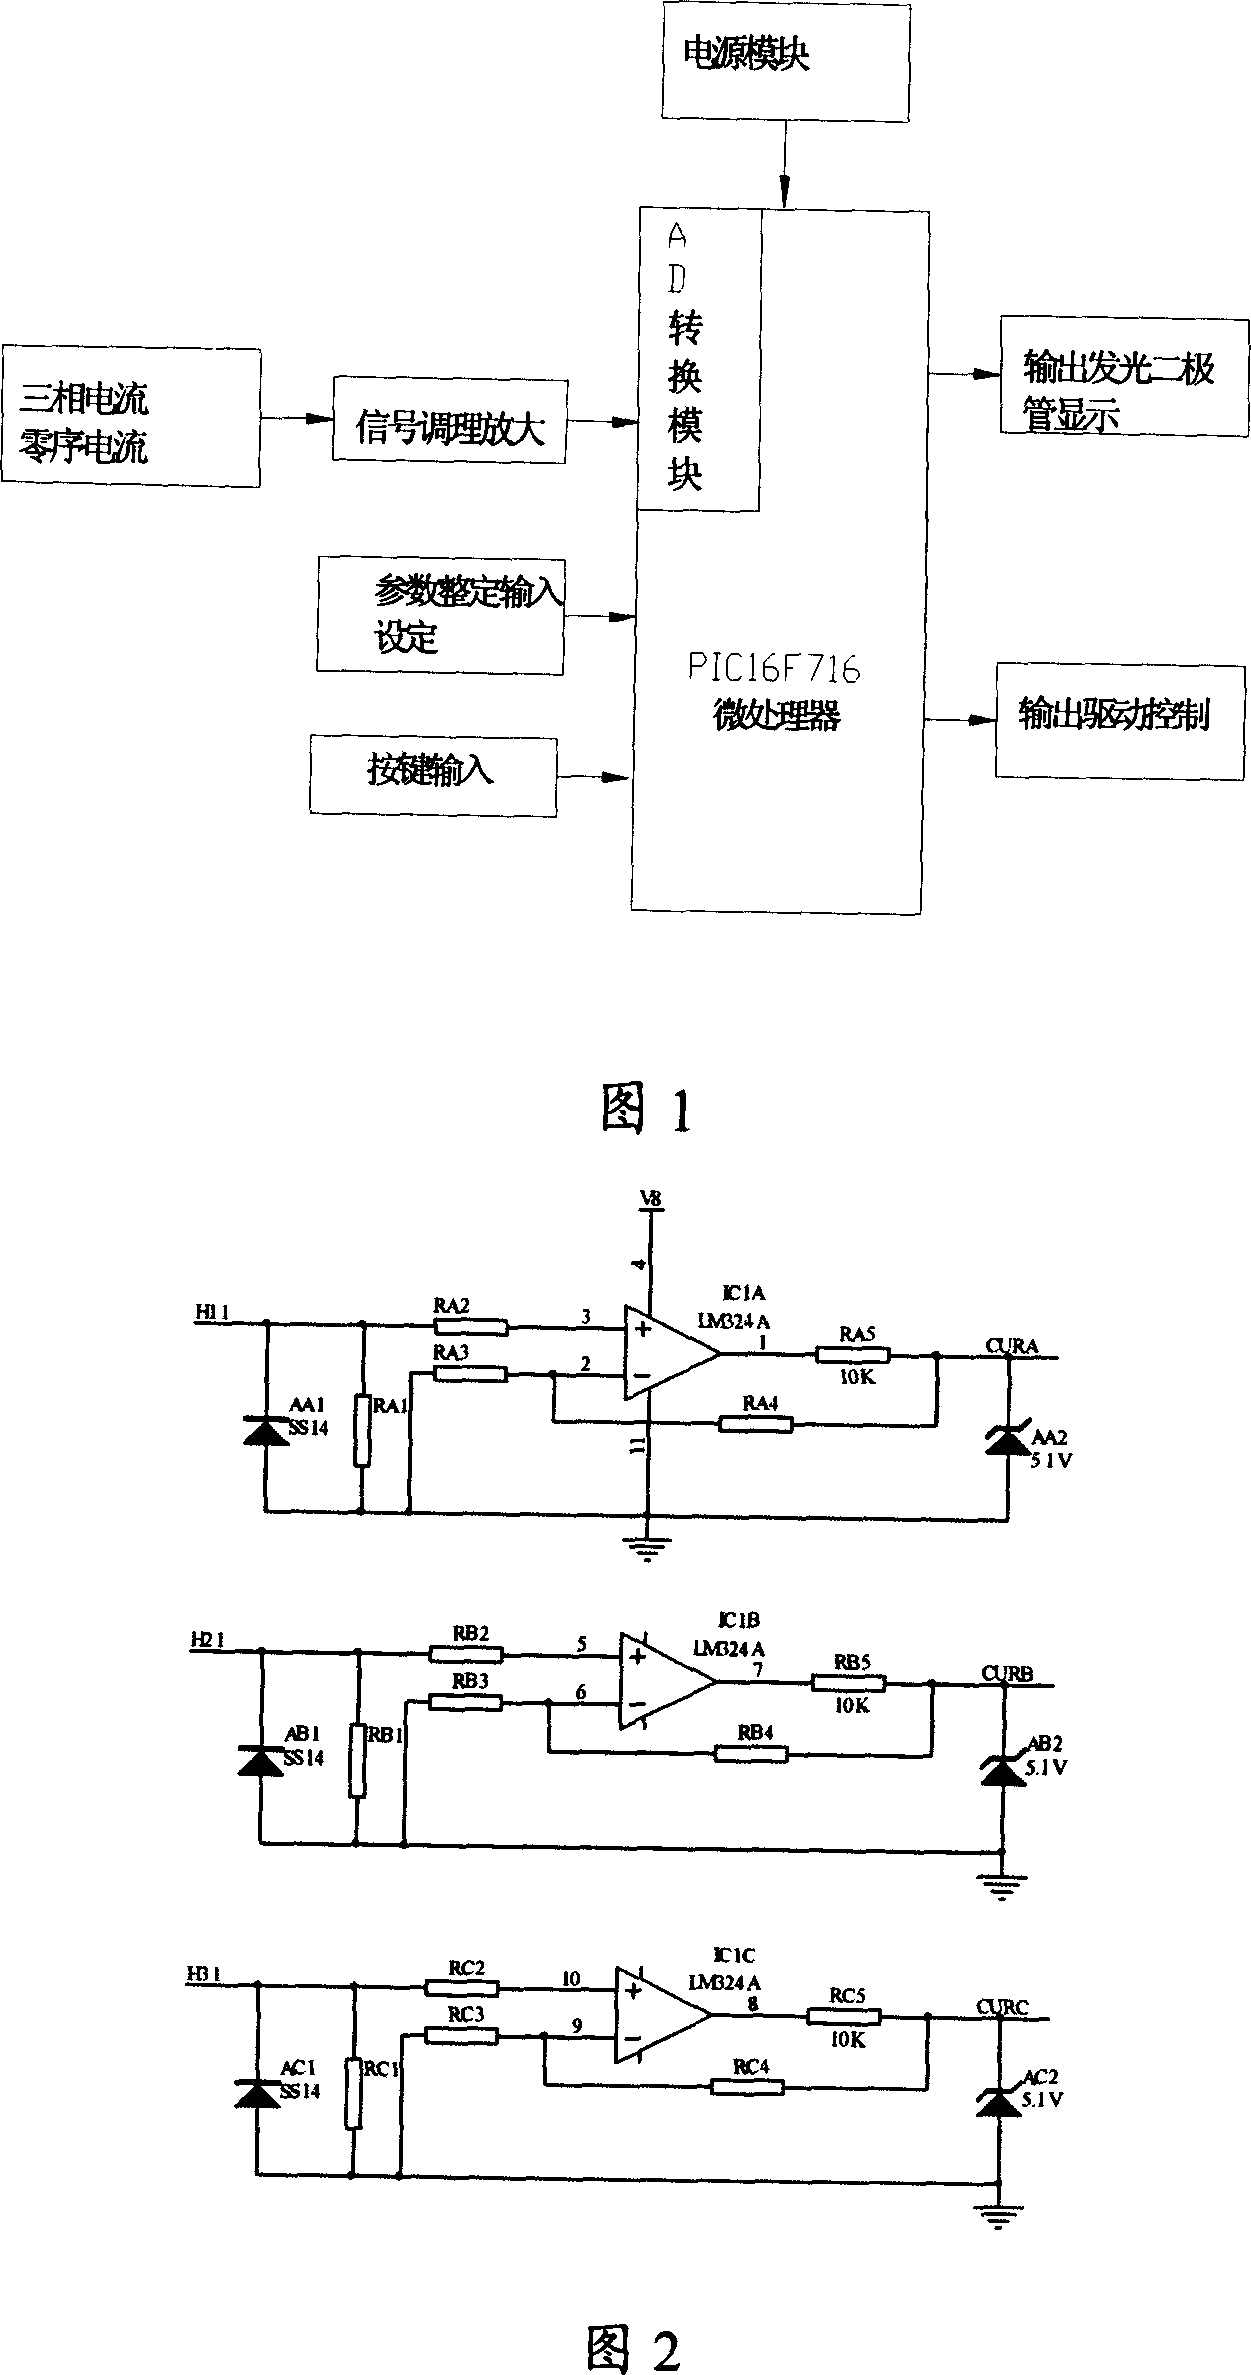 Controller for digital control and protective switch appliance